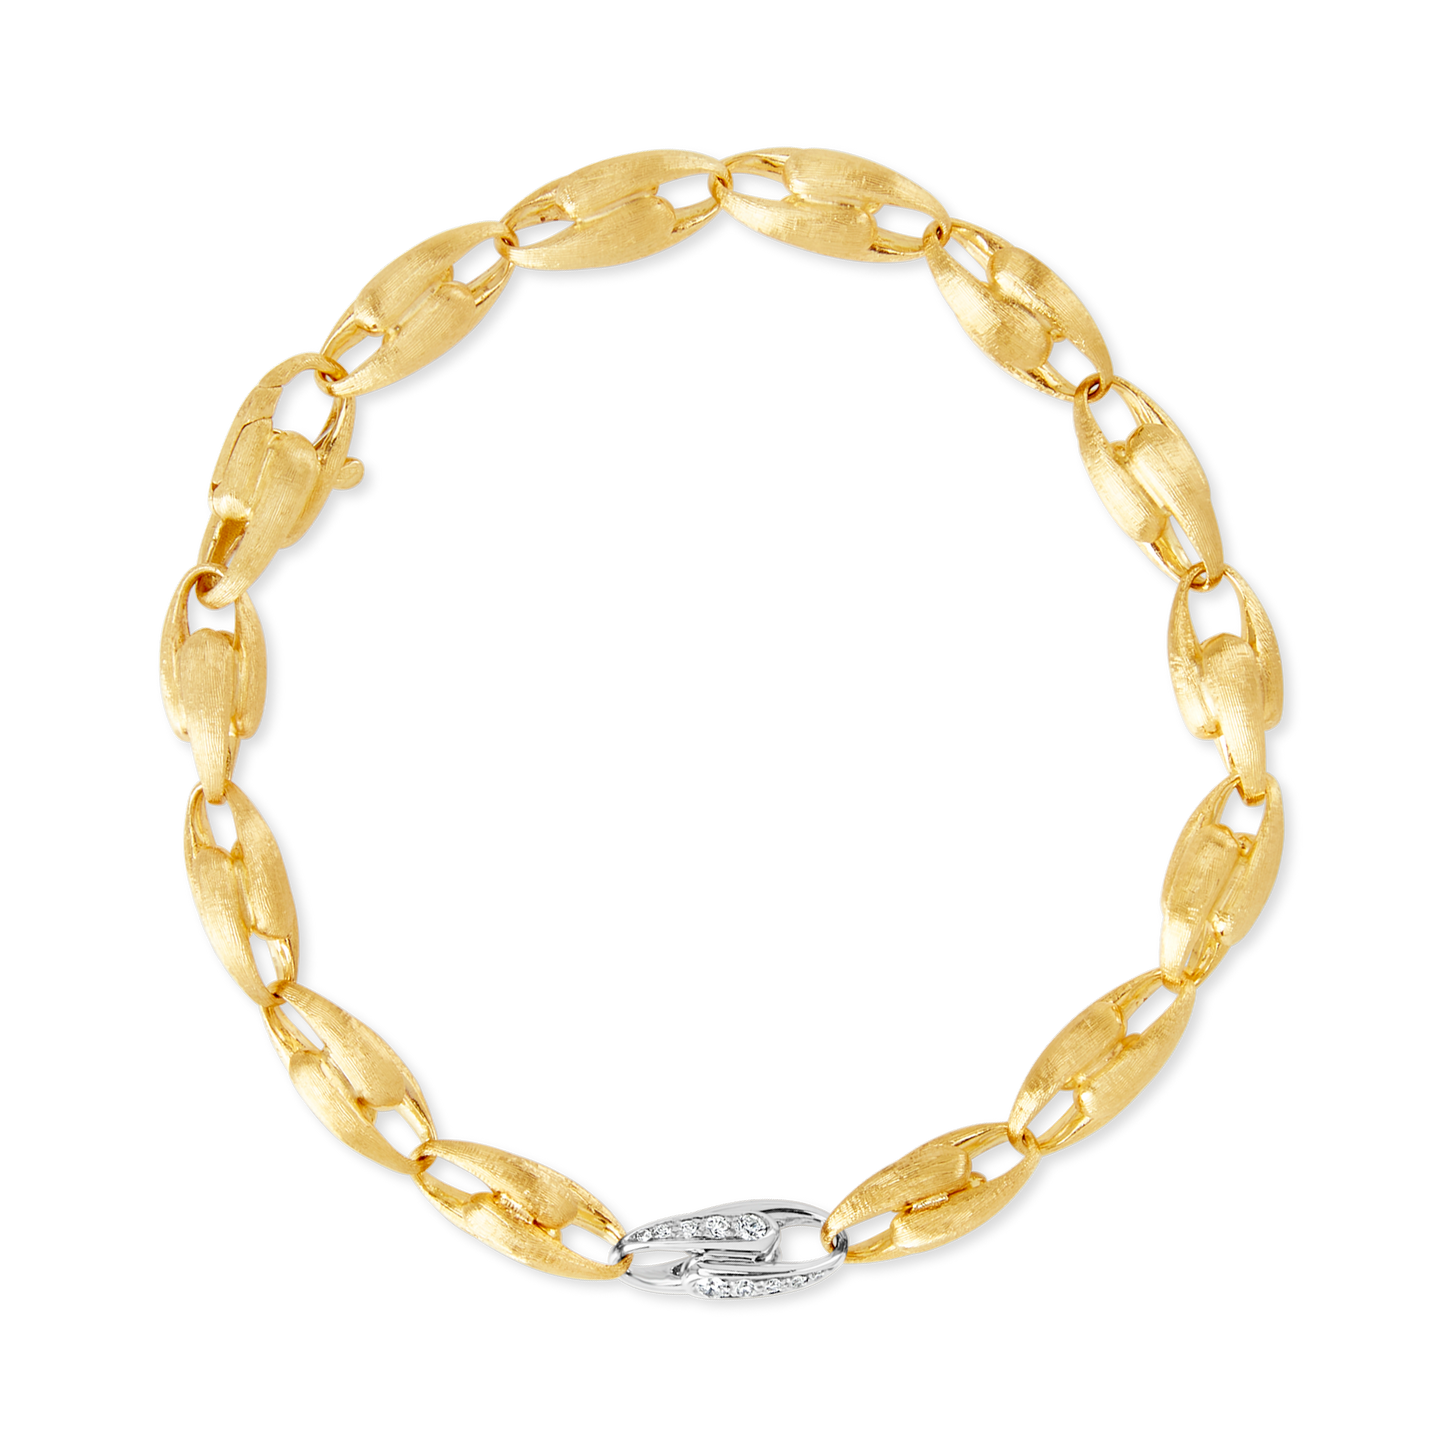 18ct Gold and Diamond "Lucia" Bracelet Marco Bicego